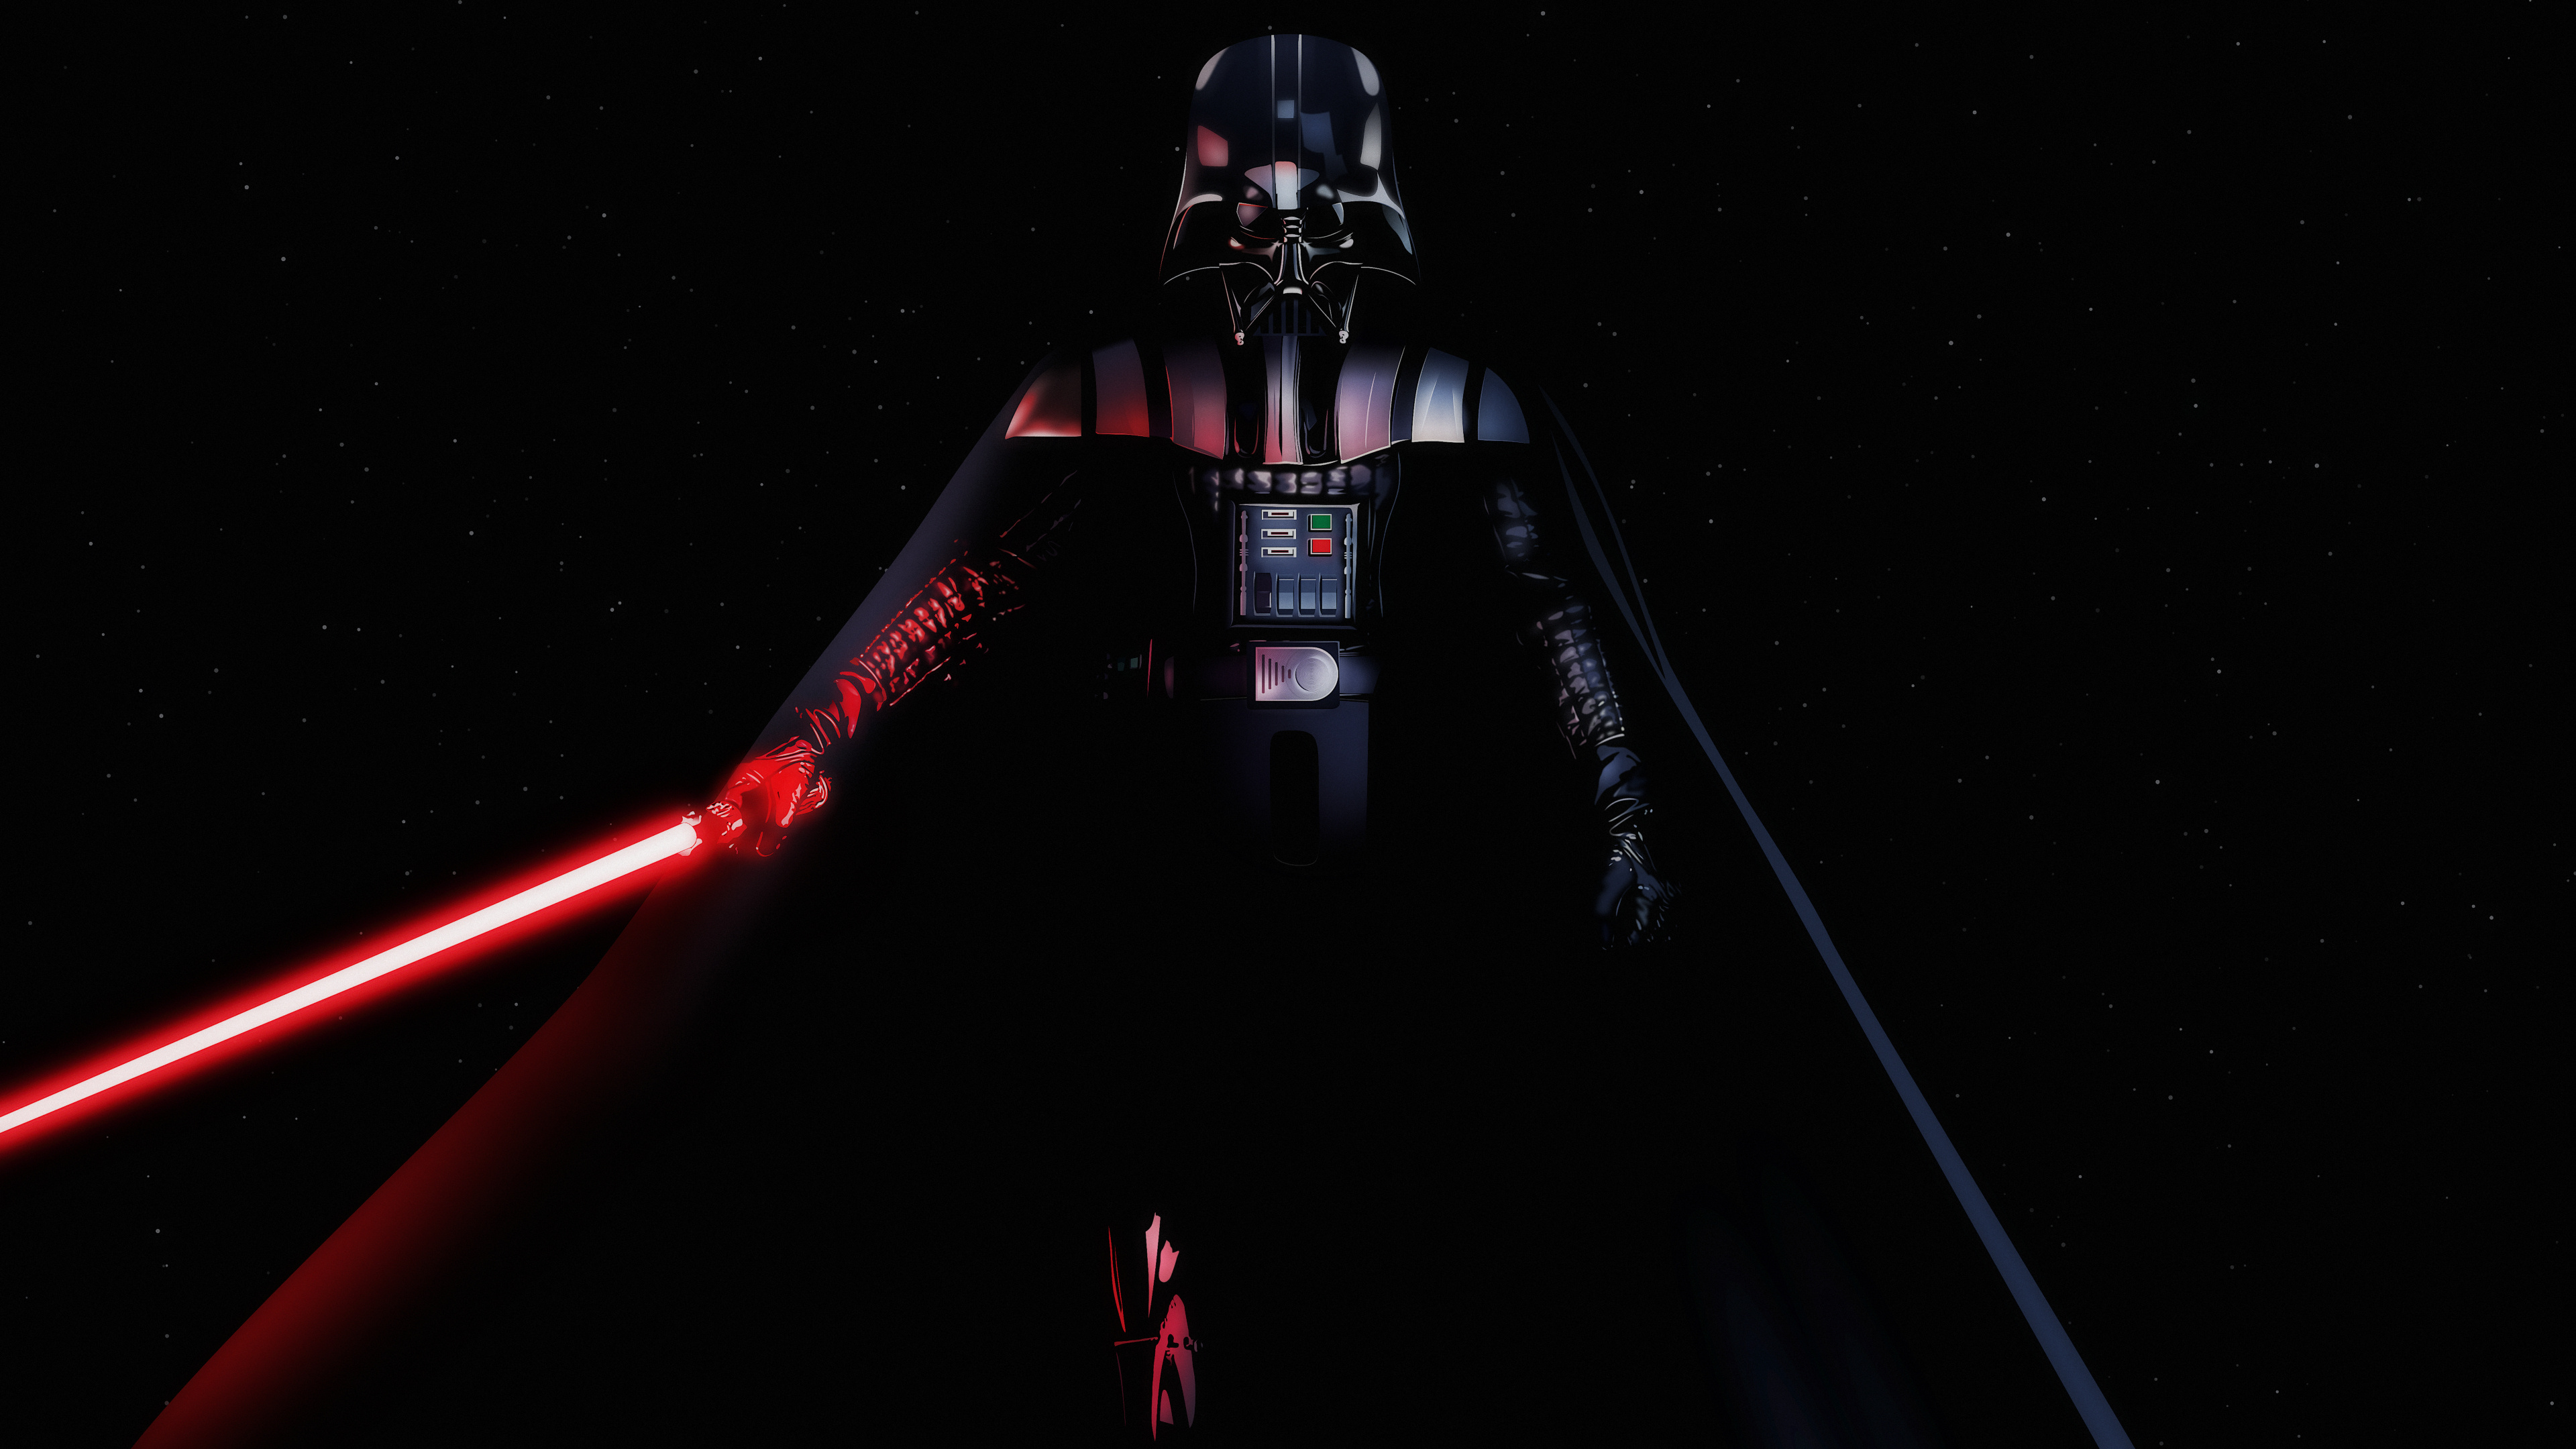 Darth Vader: Star Wars, Lightsaber, Lured to the dark side of the Force by Chancellor Palpatine. 3840x2160 4K Wallpaper.